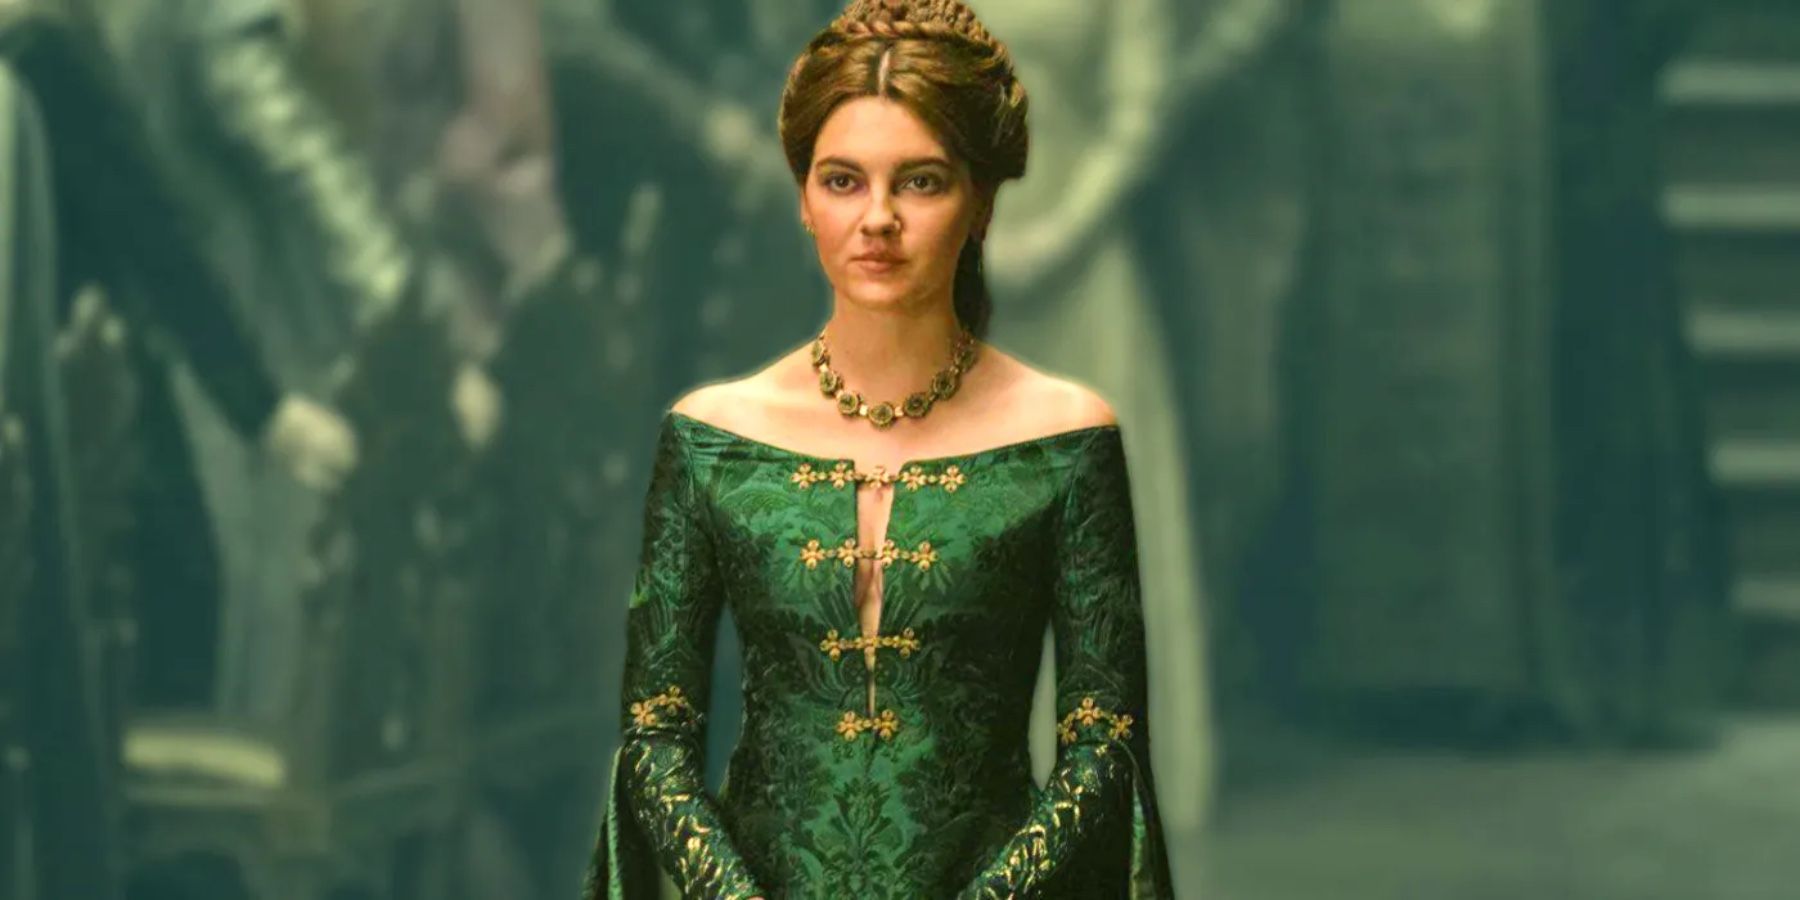 Alicent Hightower wearing a green dress in House of the Dragon.